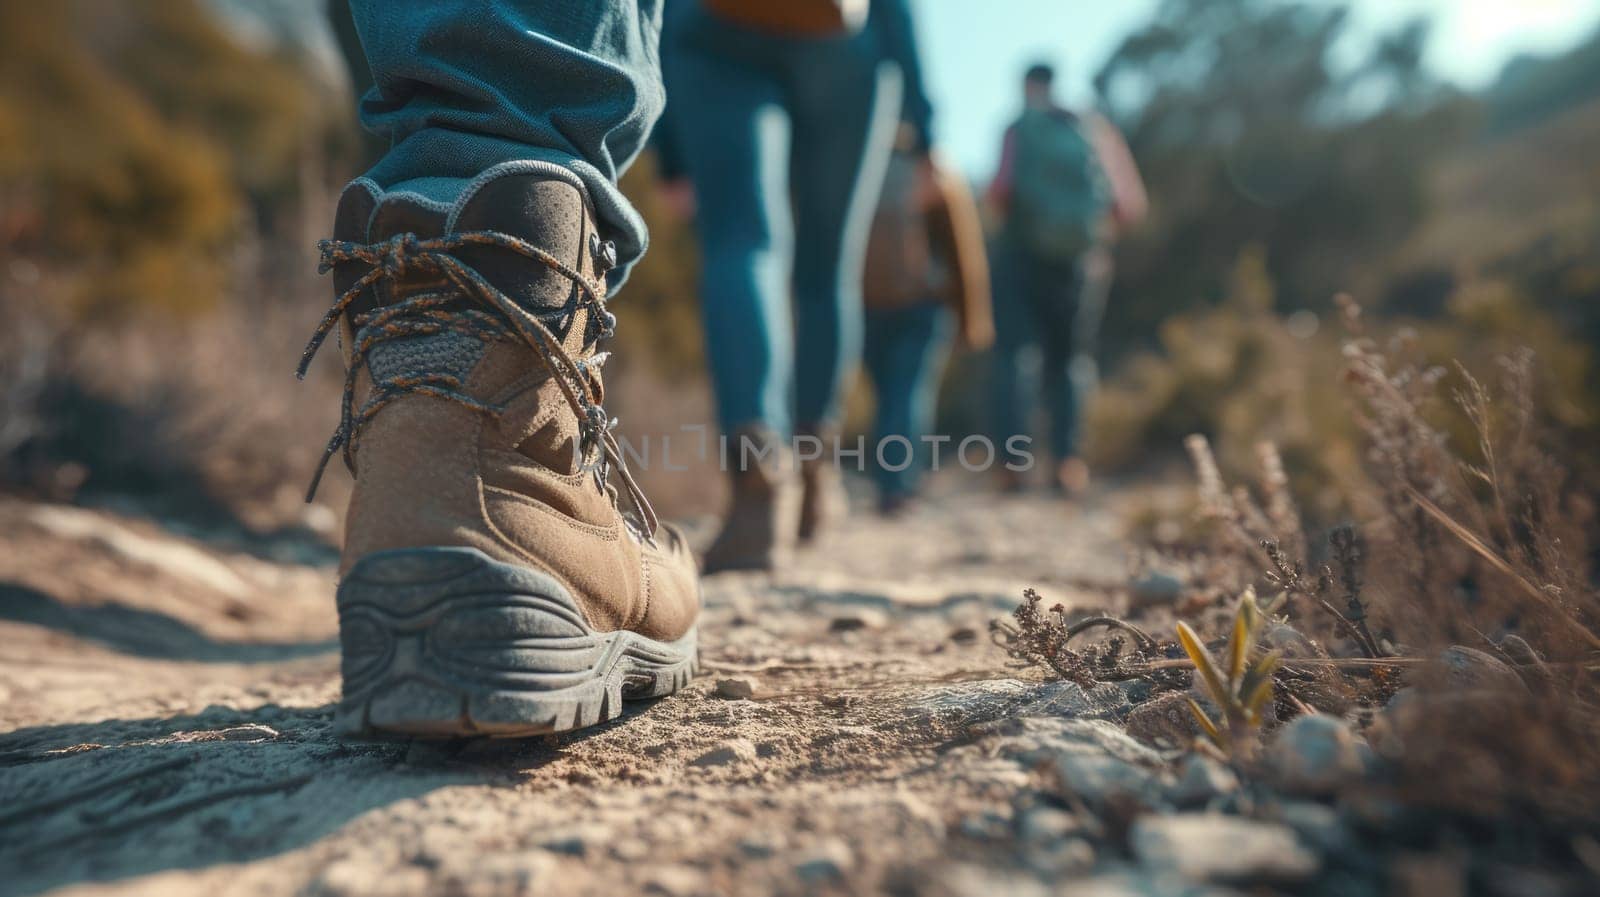 A person with hiking boots explores the natural landscape of a forest, walking along a woodland path. The vibrant electric blue sky complements the lush green scenery. AIG41